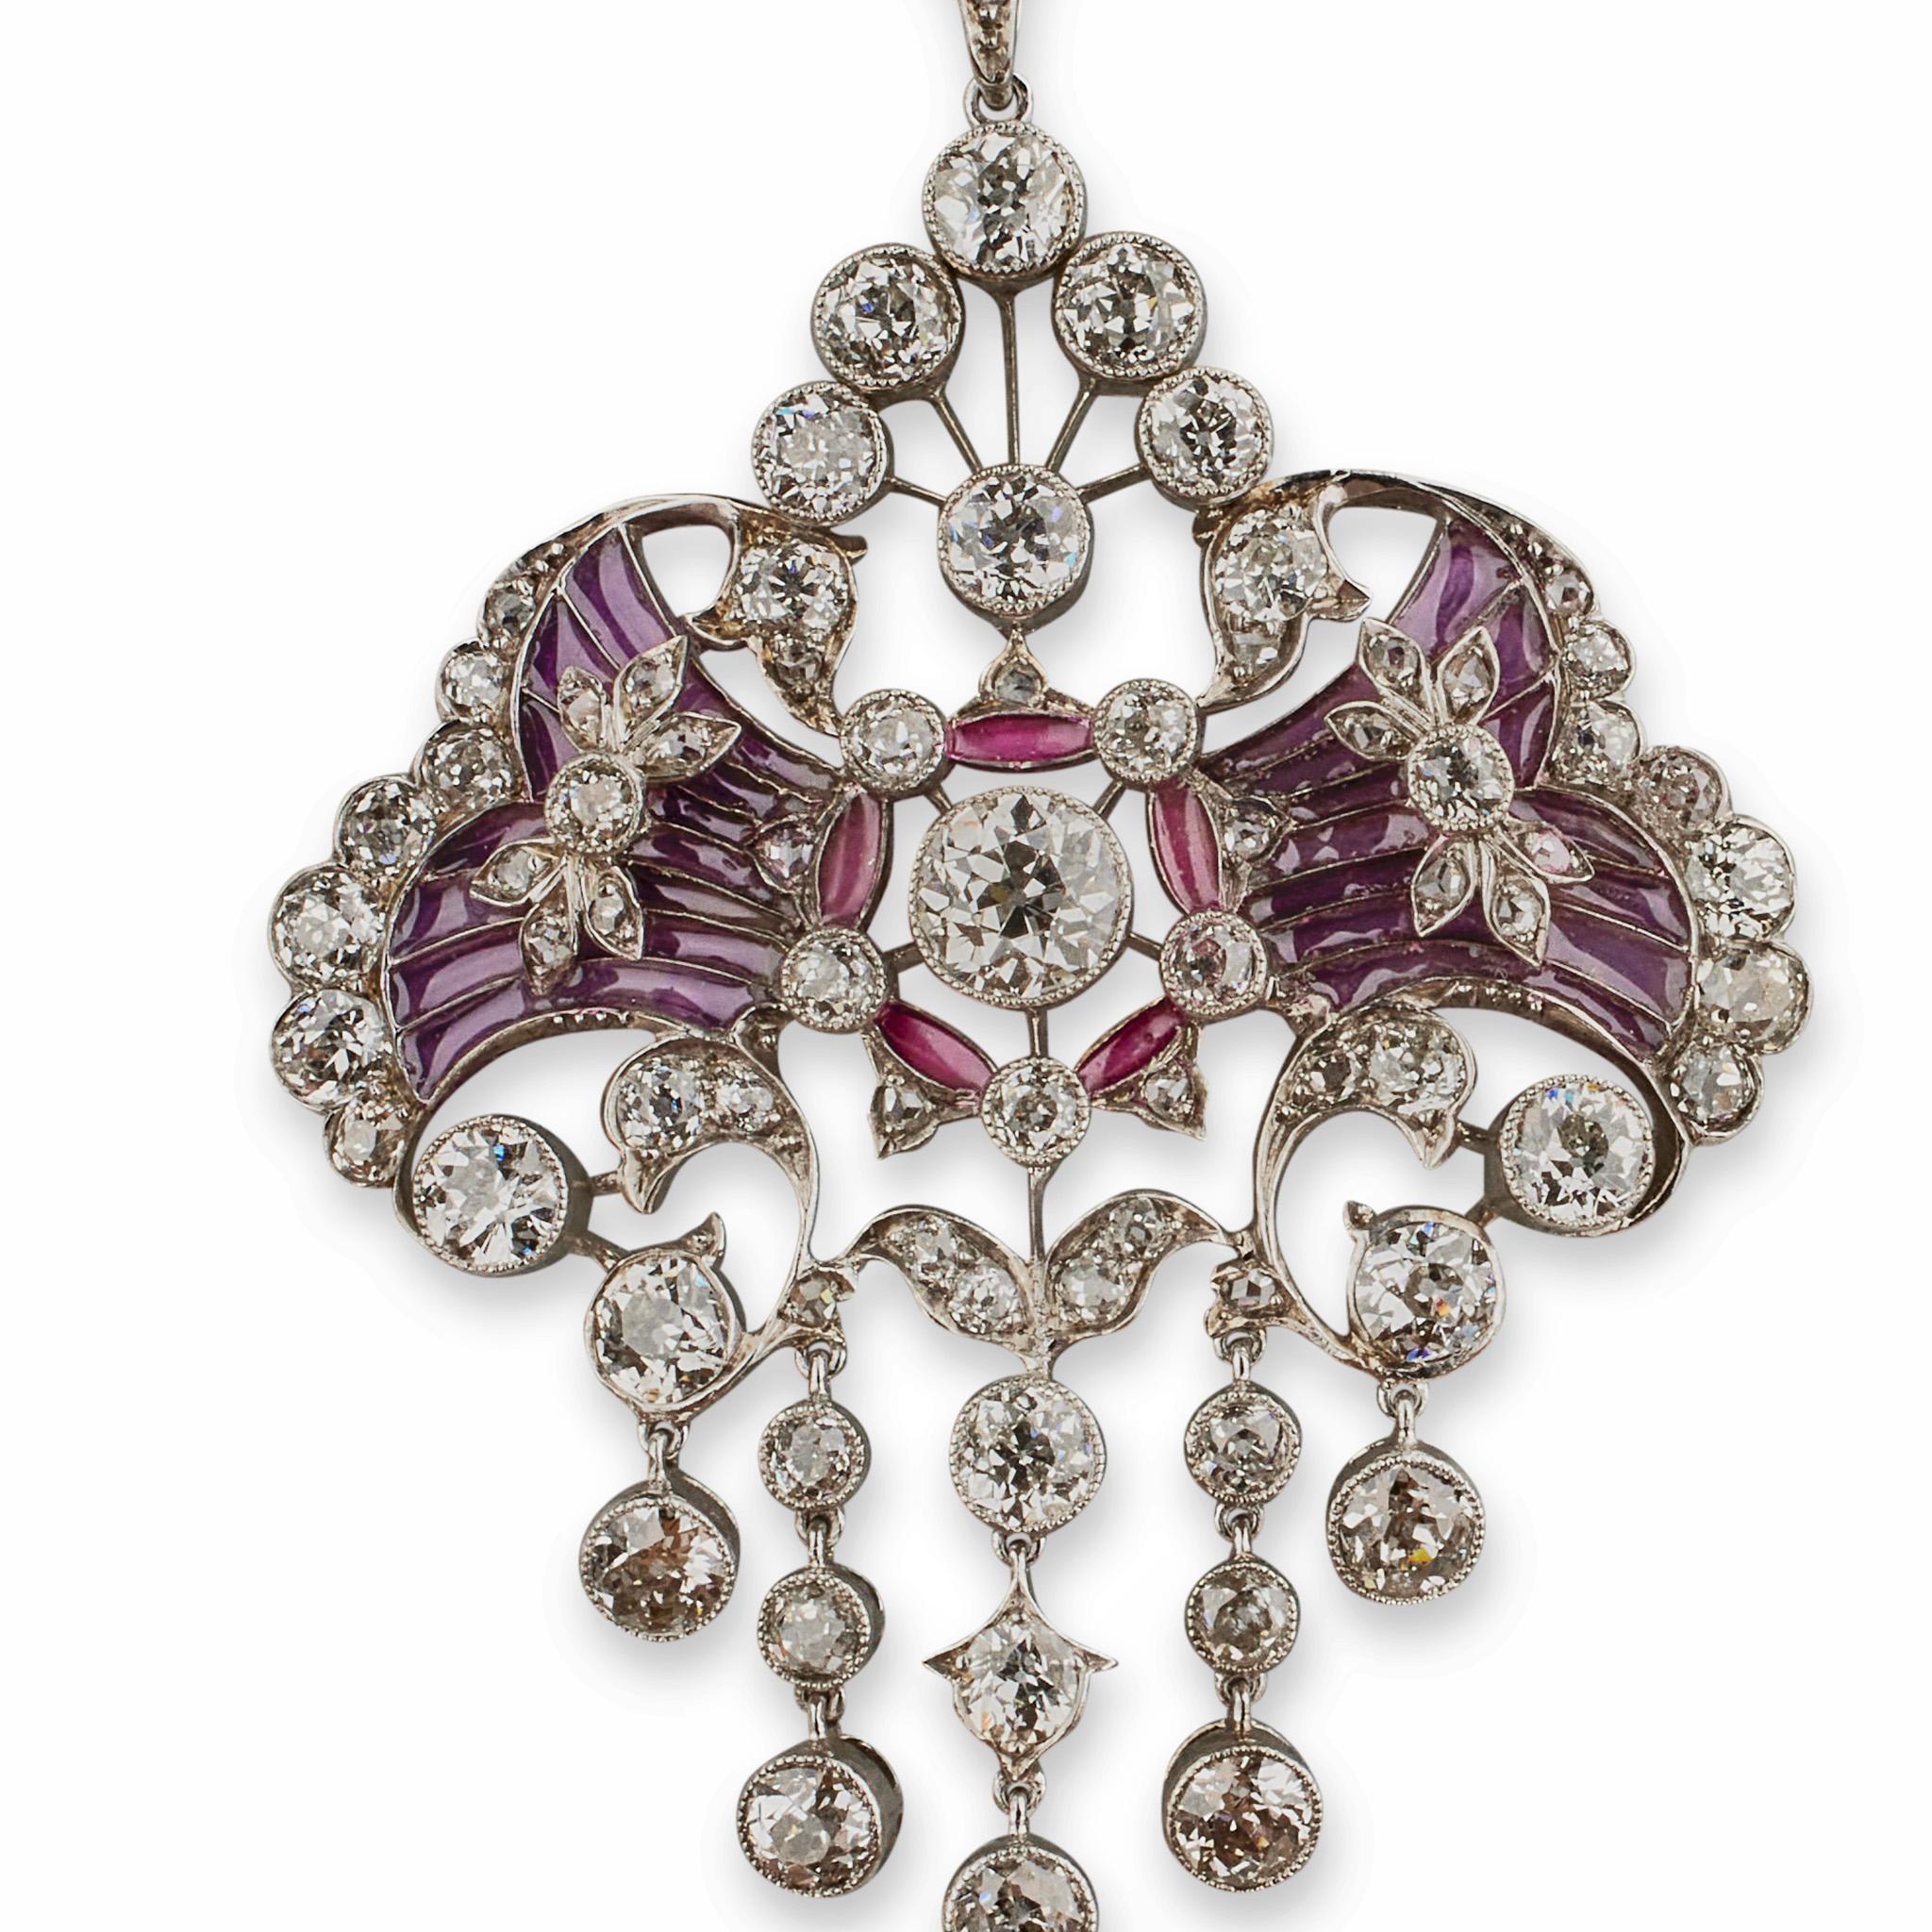 Edwardian Diamond and Plique-à-jour Enamel Pendant Necklace In Excellent Condition For Sale In New York, NY